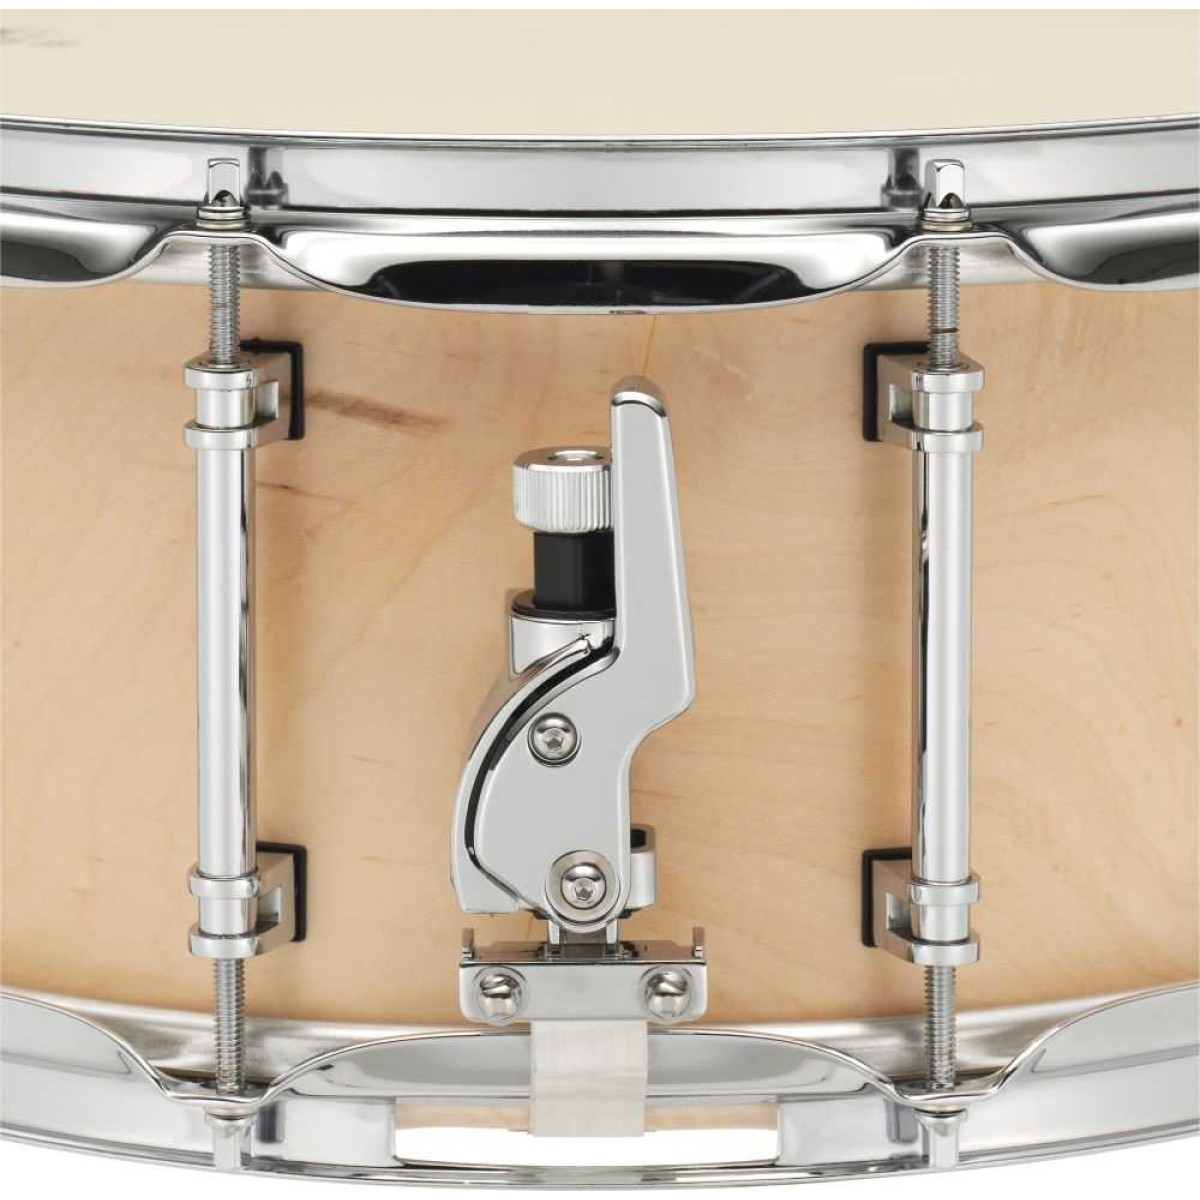 Yamaha CSM-1465 AII 14x6.5 inch Snare Drum